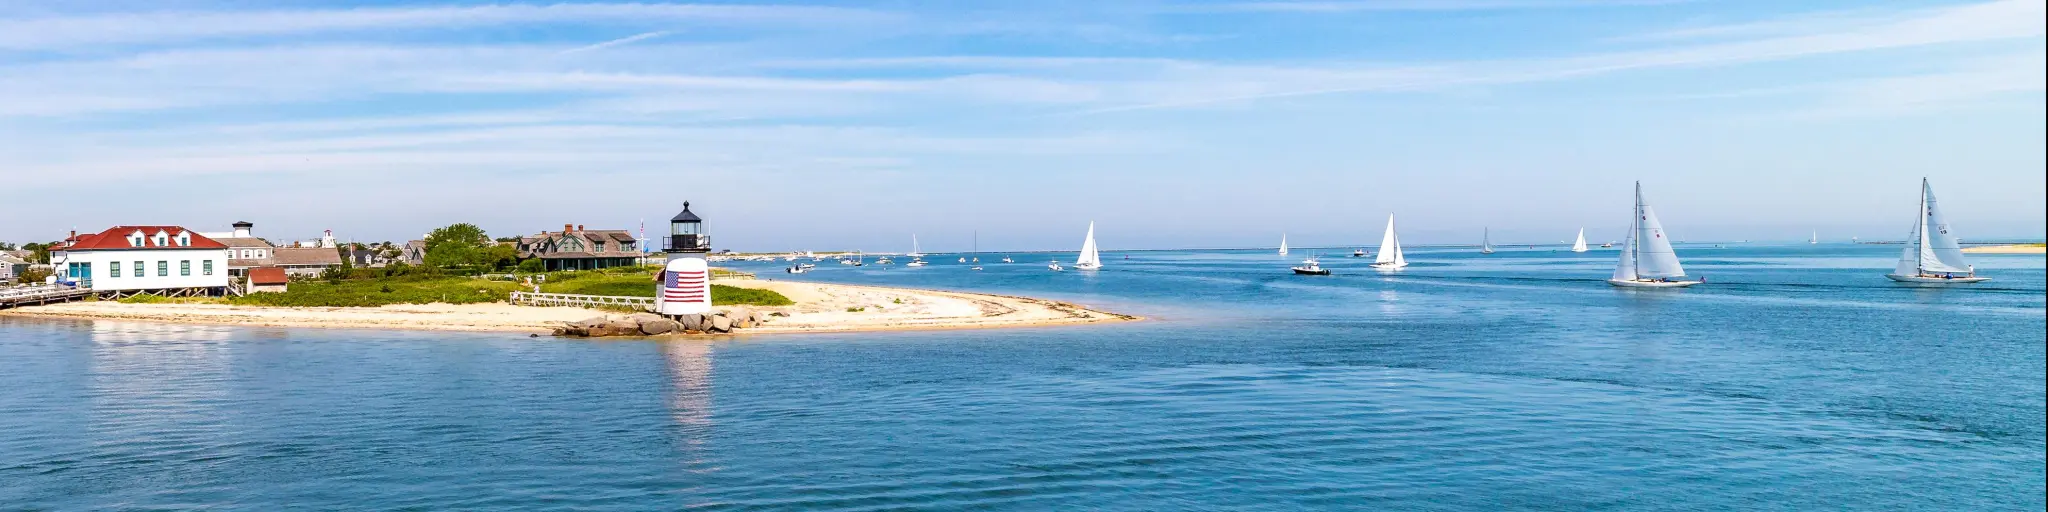 Lighthouse and sailboats under a blue sky day in the Nantucket Harbor.